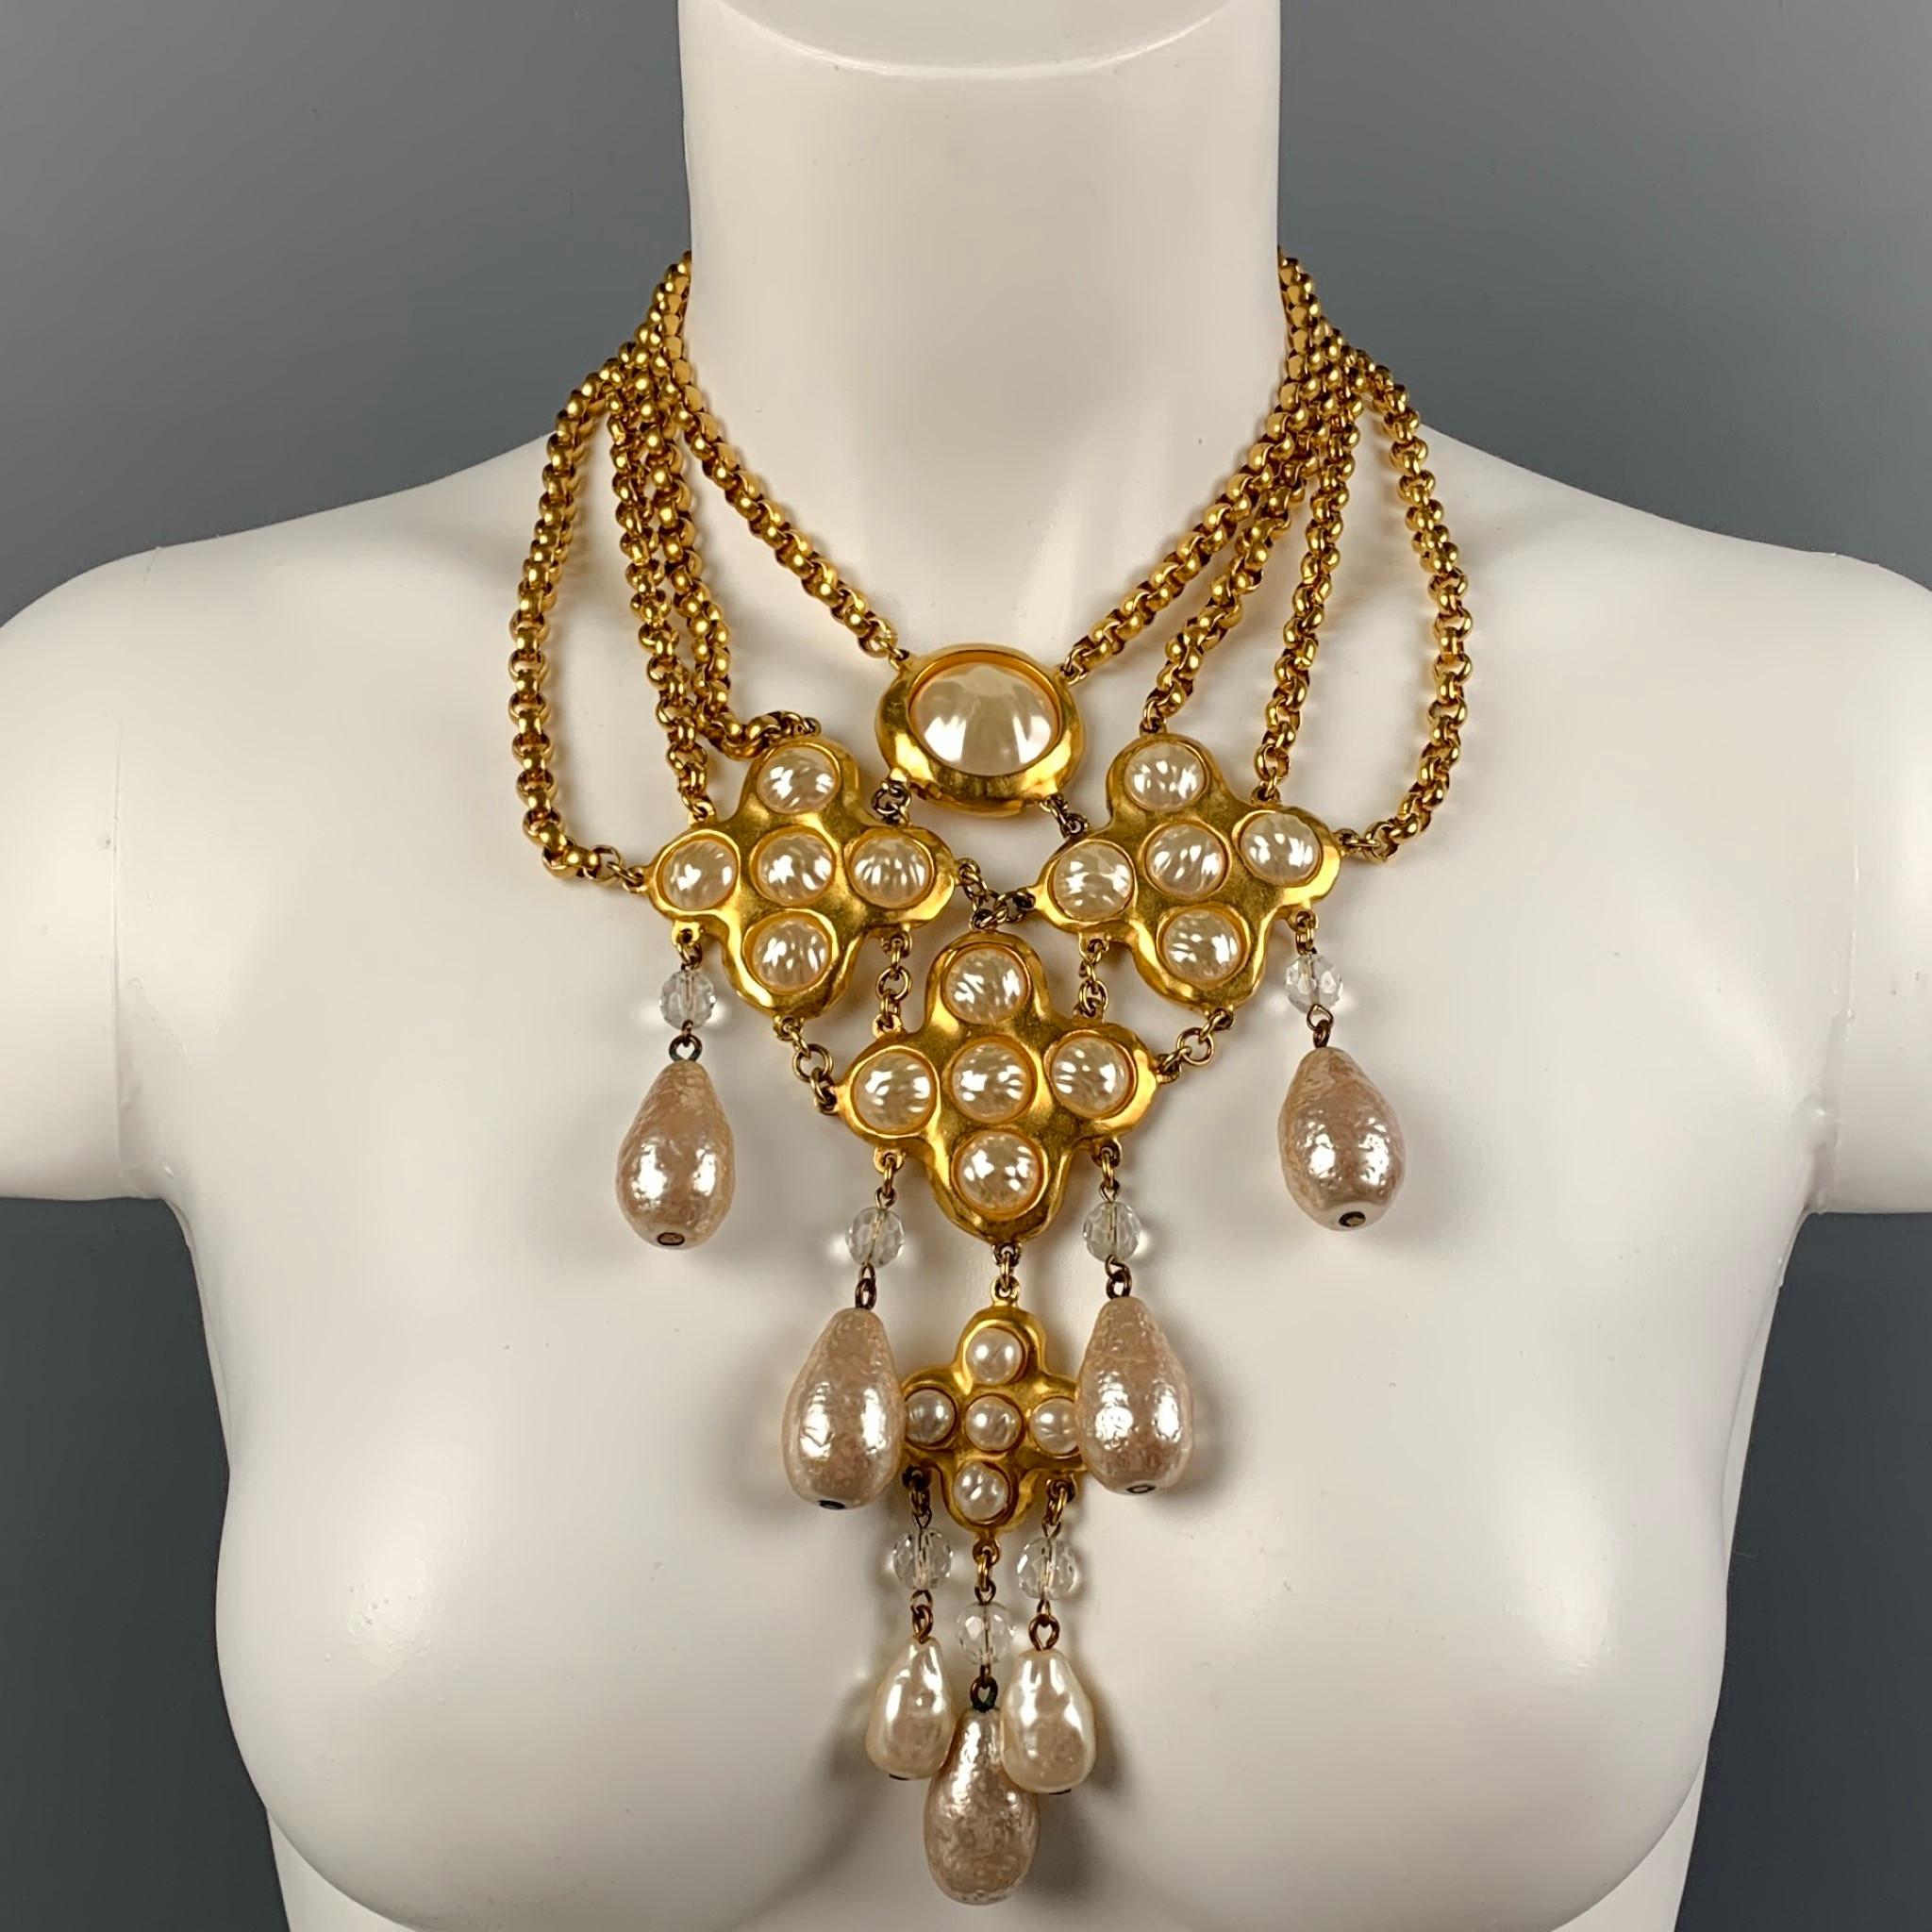 DONNA KARAN necklace comes in a gold tone metal featuring a layered chain link style, faux pearls, large pendant design, and a clasp closure. 

Good Pre-Owned Condition.

Measurements:

Length: 16 in.
Pendant Length: 4.5 in.
Pendant Height: 7 in. 